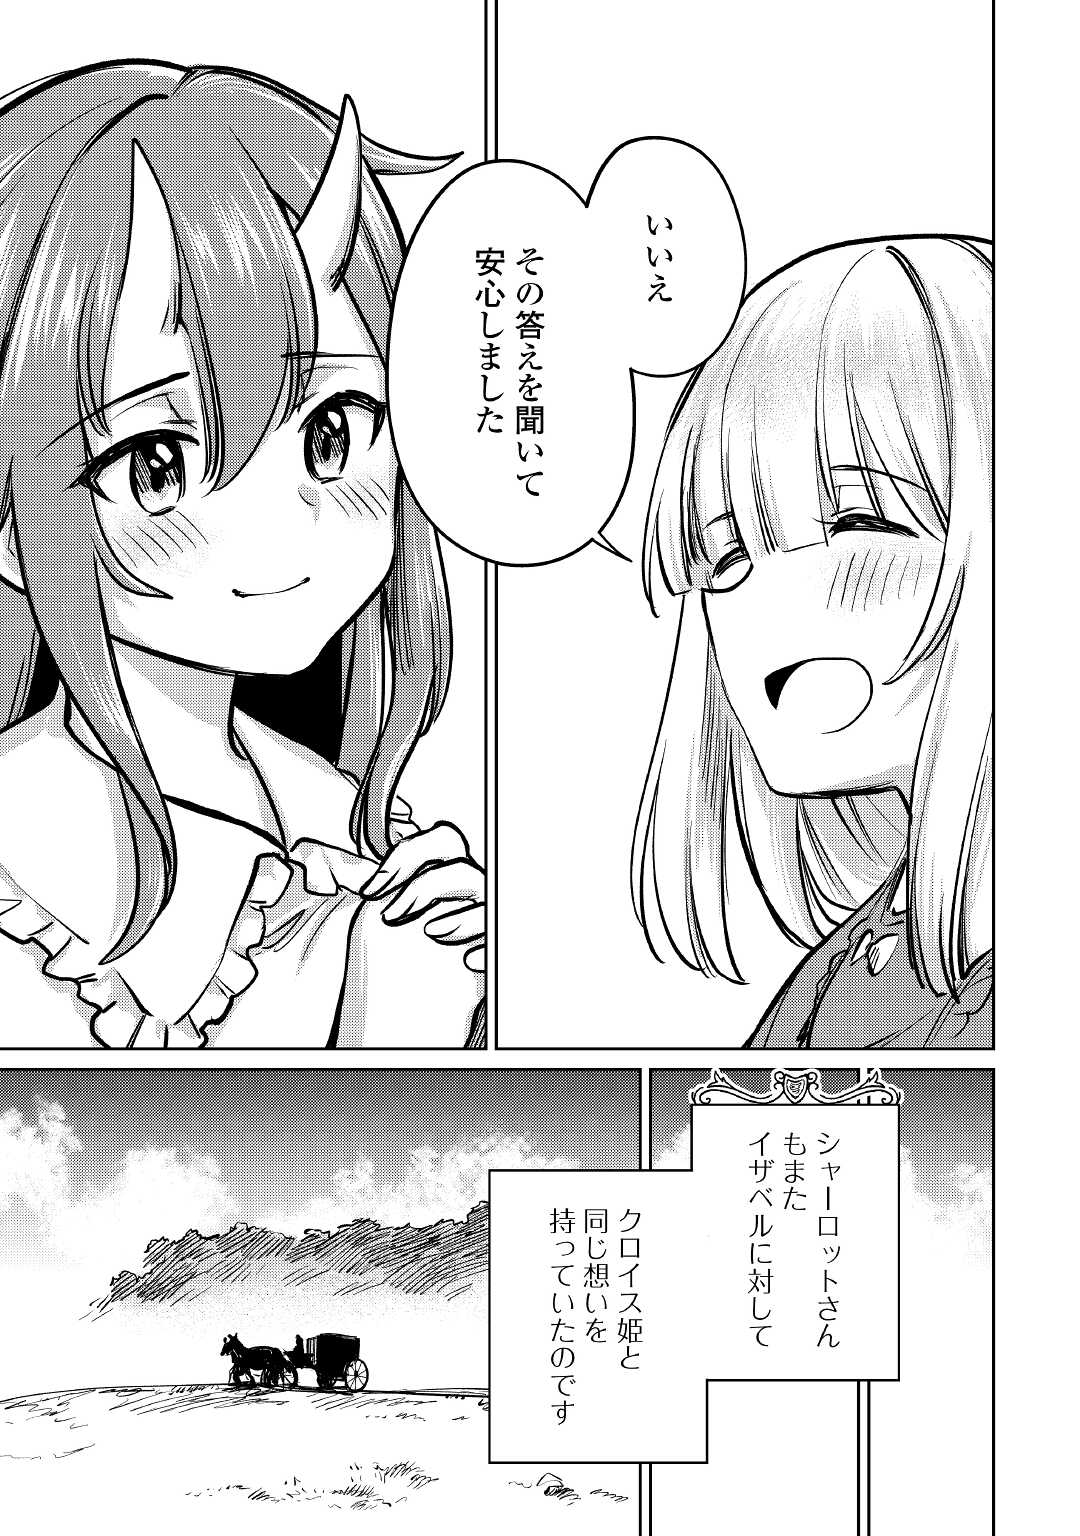 The Former Structural Researcher’s Story of Otherworldly Adventure 第36話 - Page 5